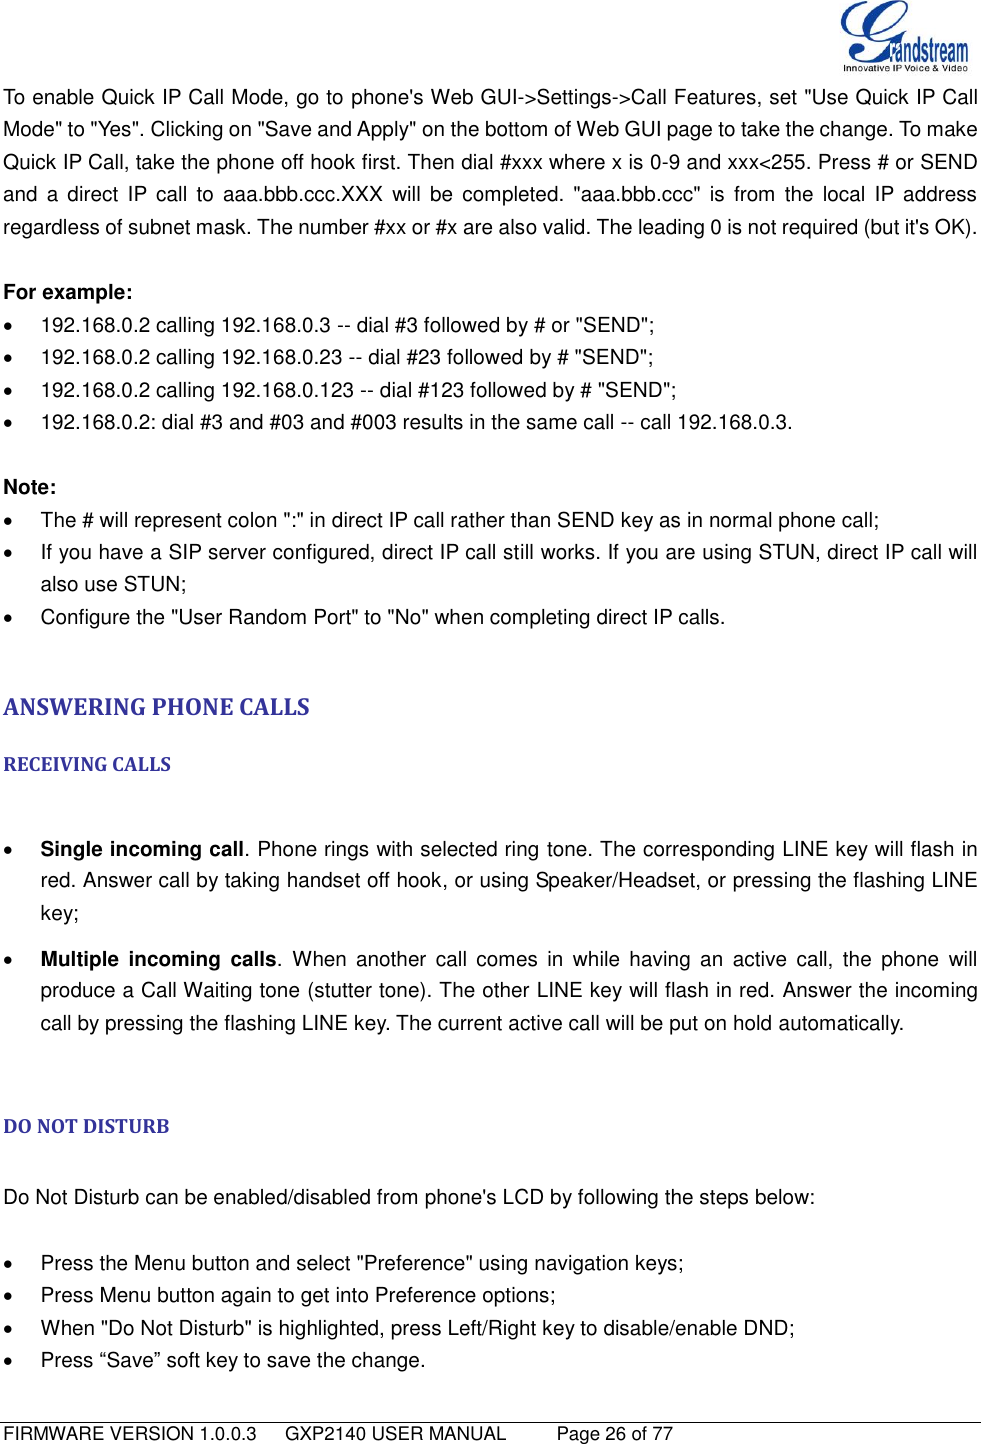   FIRMWARE VERSION 1.0.0.3   GXP2140 USER MANUAL     Page 26 of 77                                   To enable Quick IP Call Mode, go to phone&apos;s Web GUI-&gt;Settings-&gt;Call Features, set &quot;Use Quick IP Call Mode&quot; to &quot;Yes&quot;. Clicking on &quot;Save and Apply&quot; on the bottom of Web GUI page to take the change. To make Quick IP Call, take the phone off hook first. Then dial #xxx where x is 0-9 and xxx&lt;255. Press # or SEND and  a  direct  IP call  to  aaa.bbb.ccc.XXX  will  be  completed.  &quot;aaa.bbb.ccc&quot;  is  from  the  local  IP address regardless of subnet mask. The number #xx or #x are also valid. The leading 0 is not required (but it&apos;s OK).  For example:   192.168.0.2 calling 192.168.0.3 -- dial #3 followed by # or &quot;SEND&quot;;   192.168.0.2 calling 192.168.0.23 -- dial #23 followed by # &quot;SEND&quot;;   192.168.0.2 calling 192.168.0.123 -- dial #123 followed by # &quot;SEND&quot;;   192.168.0.2: dial #3 and #03 and #003 results in the same call -- call 192.168.0.3.  Note:   The # will represent colon &quot;:&quot; in direct IP call rather than SEND key as in normal phone call;   If you have a SIP server configured, direct IP call still works. If you are using STUN, direct IP call will also use STUN;   Configure the &quot;User Random Port&quot; to &quot;No&quot; when completing direct IP calls.  ANSWERING PHONE CALLS RECEIVING CALLS   Single incoming call. Phone rings with selected ring tone. The corresponding LINE key will flash in red. Answer call by taking handset off hook, or using Speaker/Headset, or pressing the flashing LINE key;  Multiple  incoming  calls.  When  another  call  comes  in  while  having  an  active  call,  the  phone  will produce a Call Waiting tone (stutter tone). The other LINE key will flash in red. Answer the incoming call by pressing the flashing LINE key. The current active call will be put on hold automatically.  DO NOT DISTURB  Do Not Disturb can be enabled/disabled from phone&apos;s LCD by following the steps below:    Press the Menu button and select &quot;Preference&quot; using navigation keys;   Press Menu button again to get into Preference options;   When &quot;Do Not Disturb&quot; is highlighted, press Left/Right key to disable/enable DND;   Press “Save” soft key to save the change.   